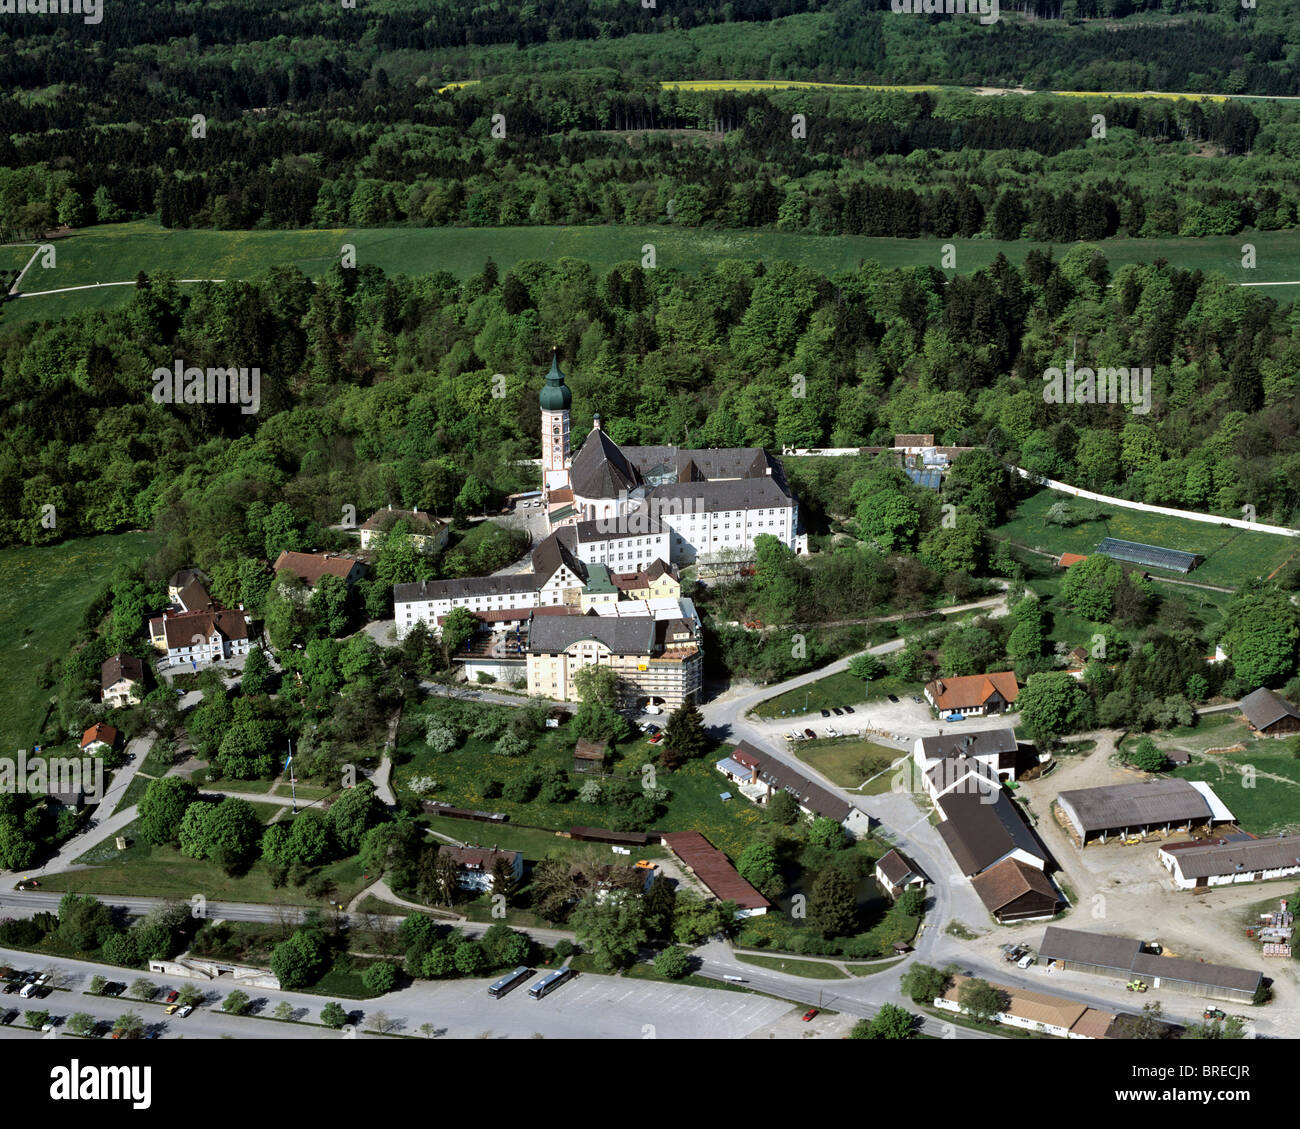 Kloster Andechs Monastery, place of pilgrimage, Benedictine priory, Upper Bavaria, Germany, Europe, aerial view Stock Photo